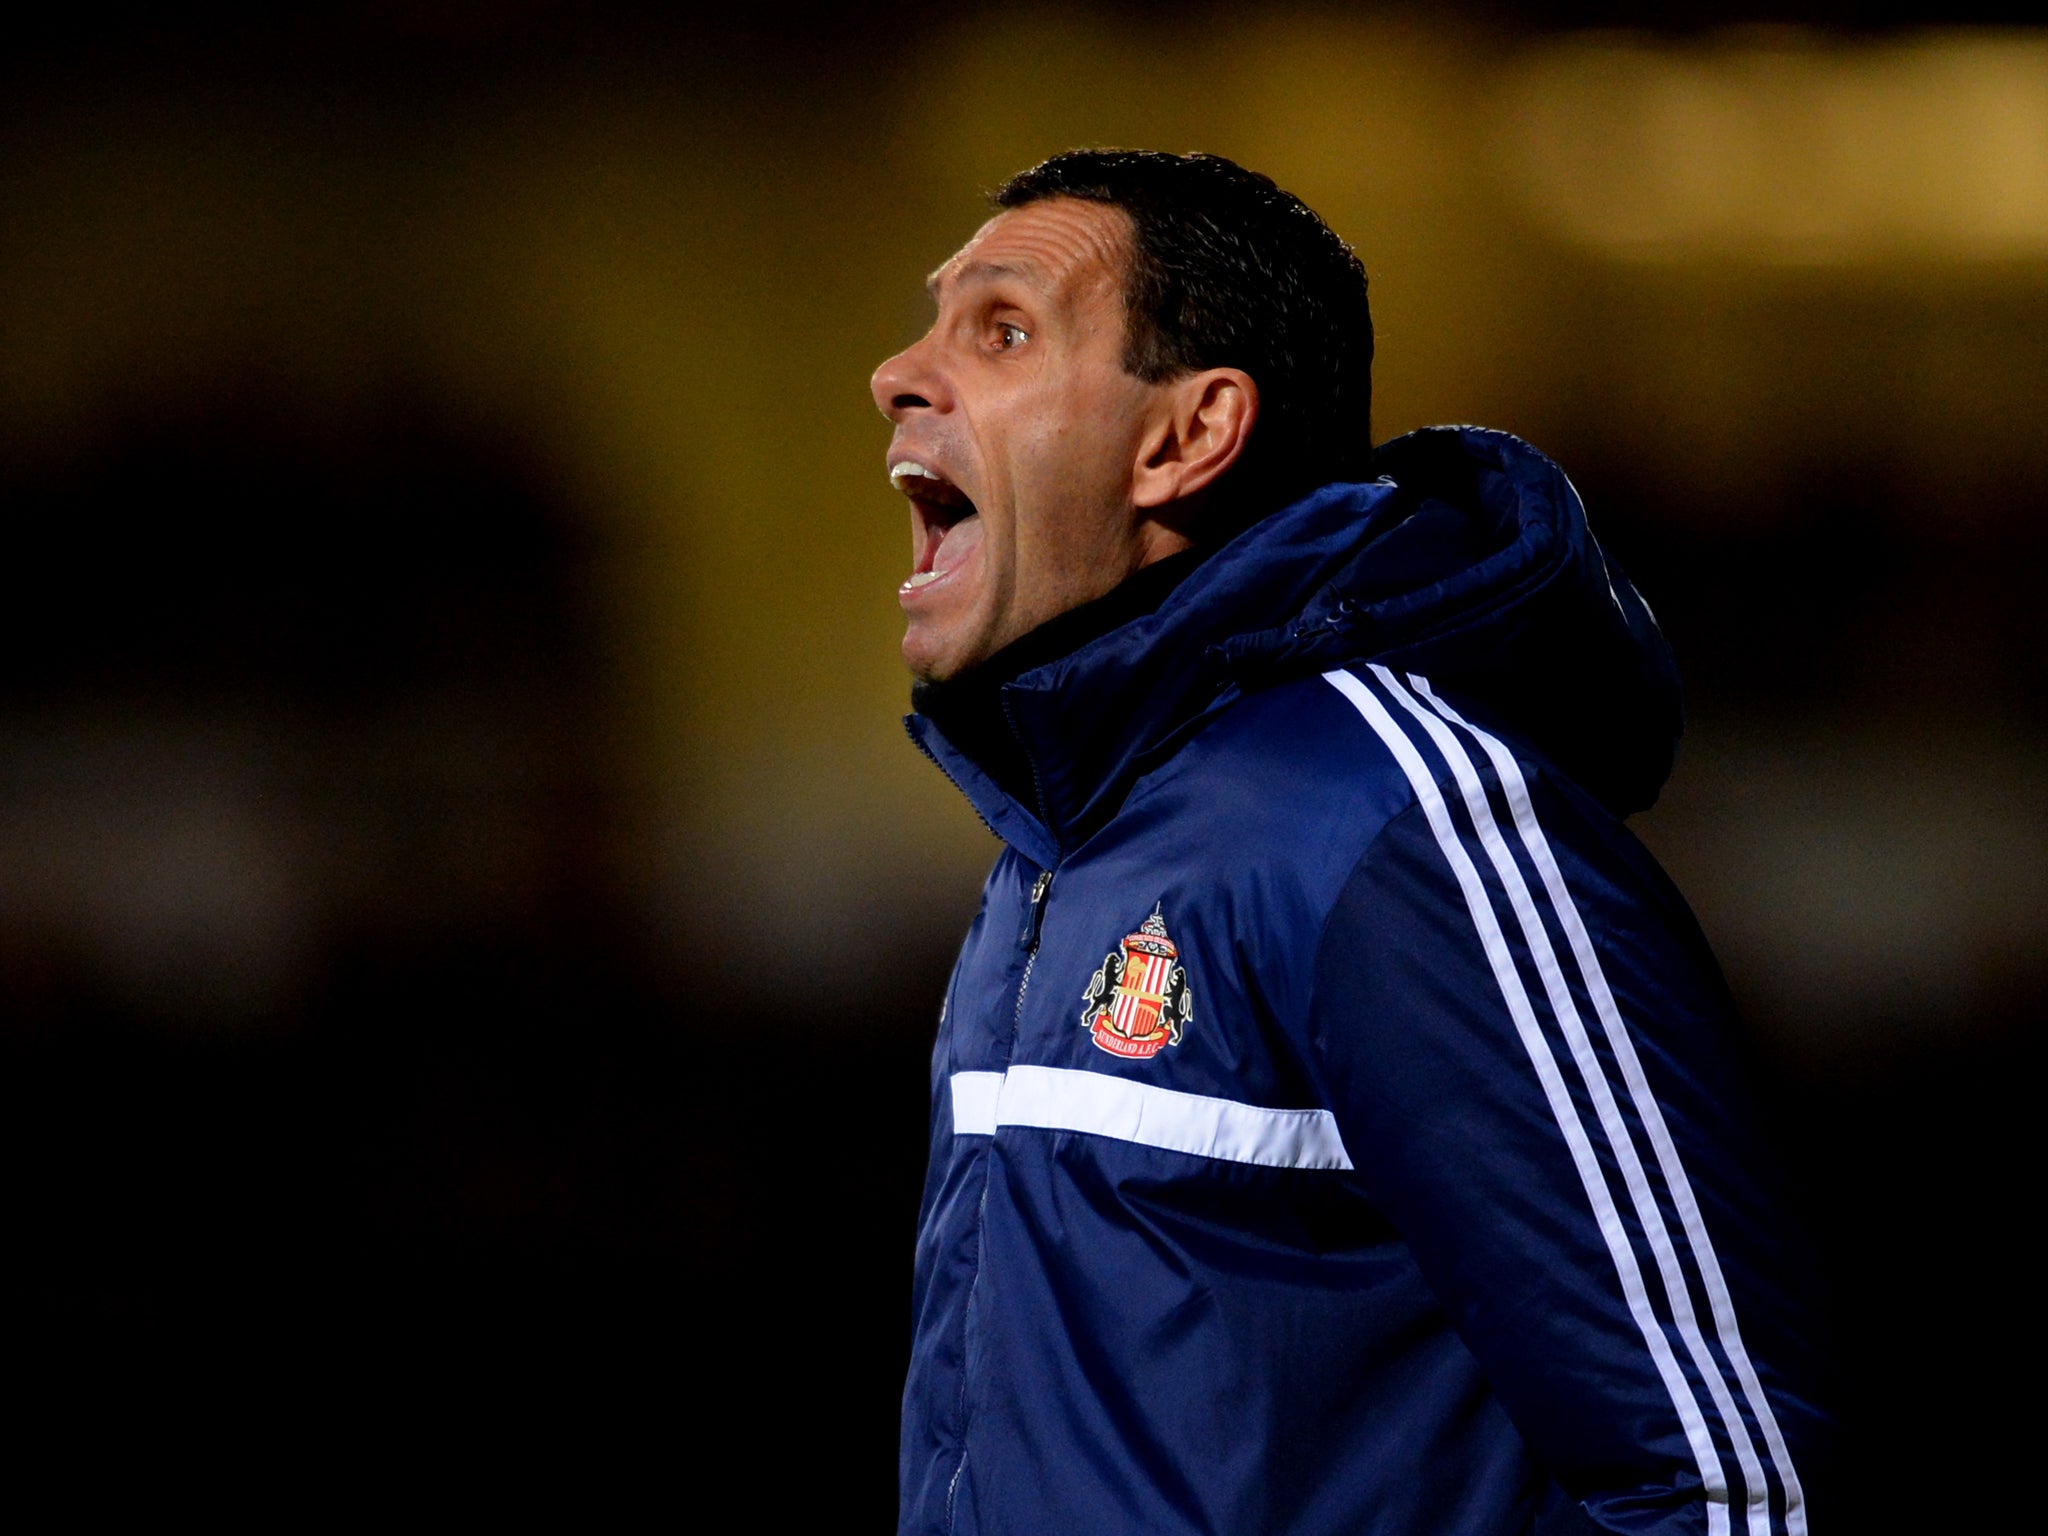 Sunderland Gus Poyet shows his frustration during the 0-0 draw with West Ham